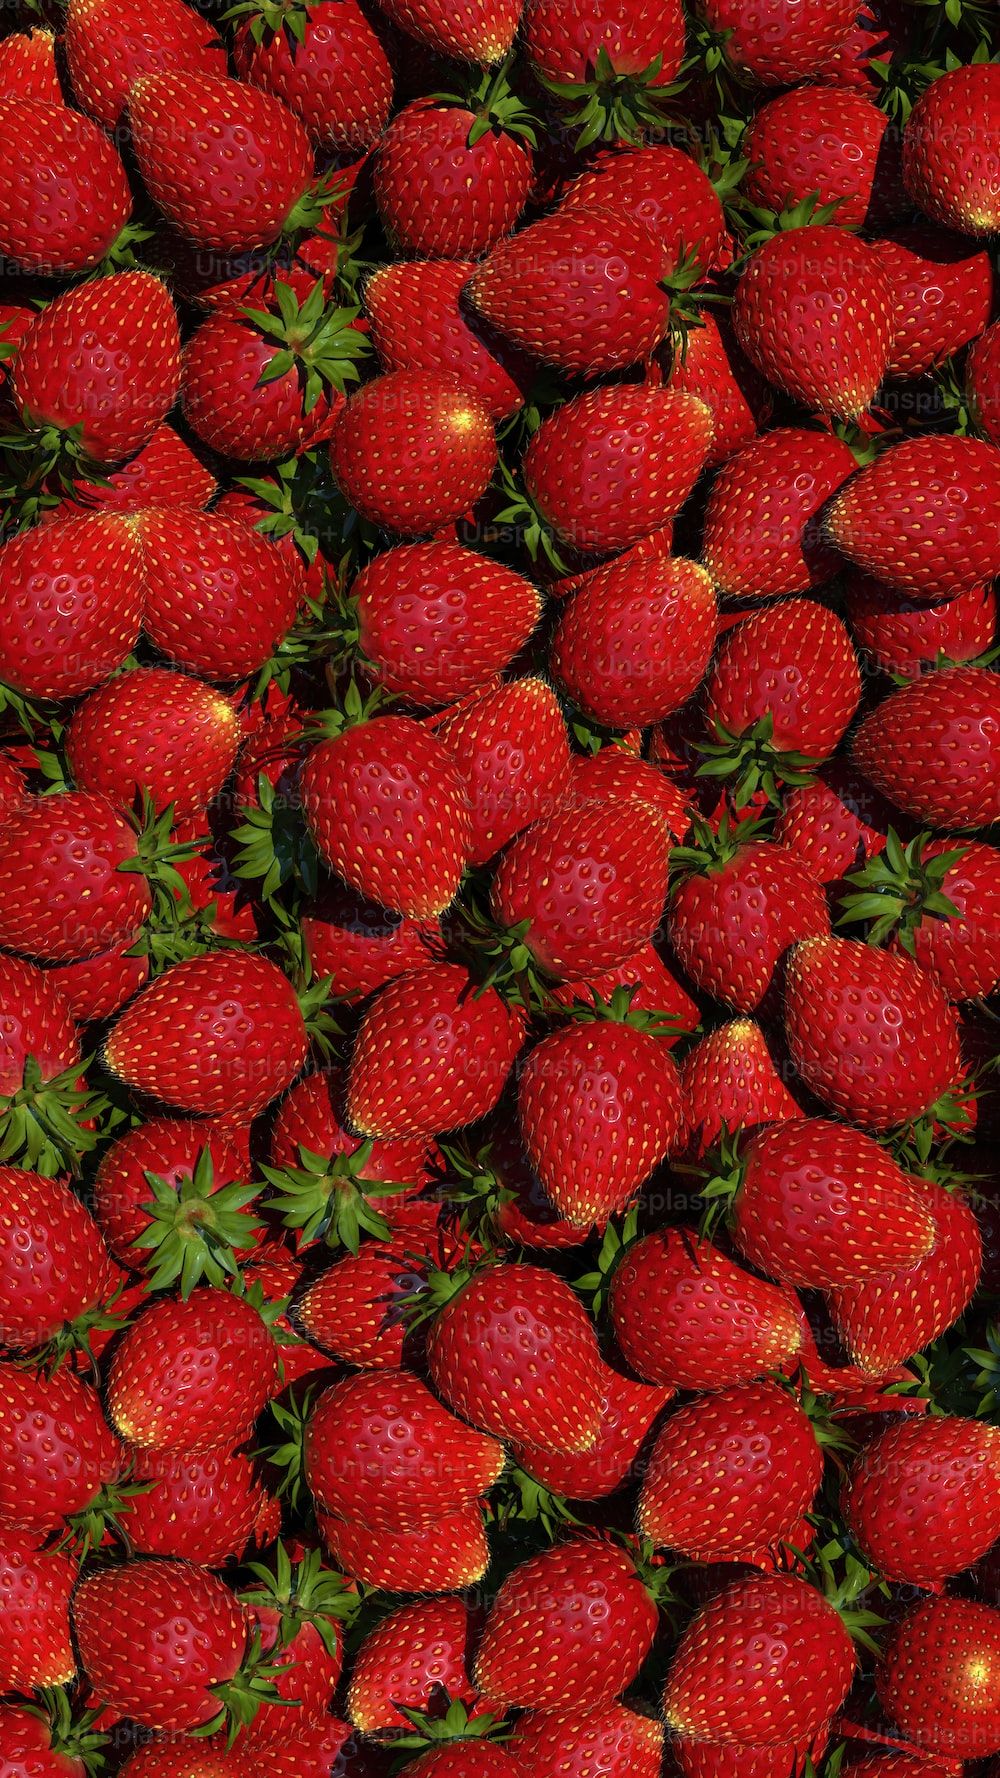 A large pile of fresh strawberries. - Strawberry